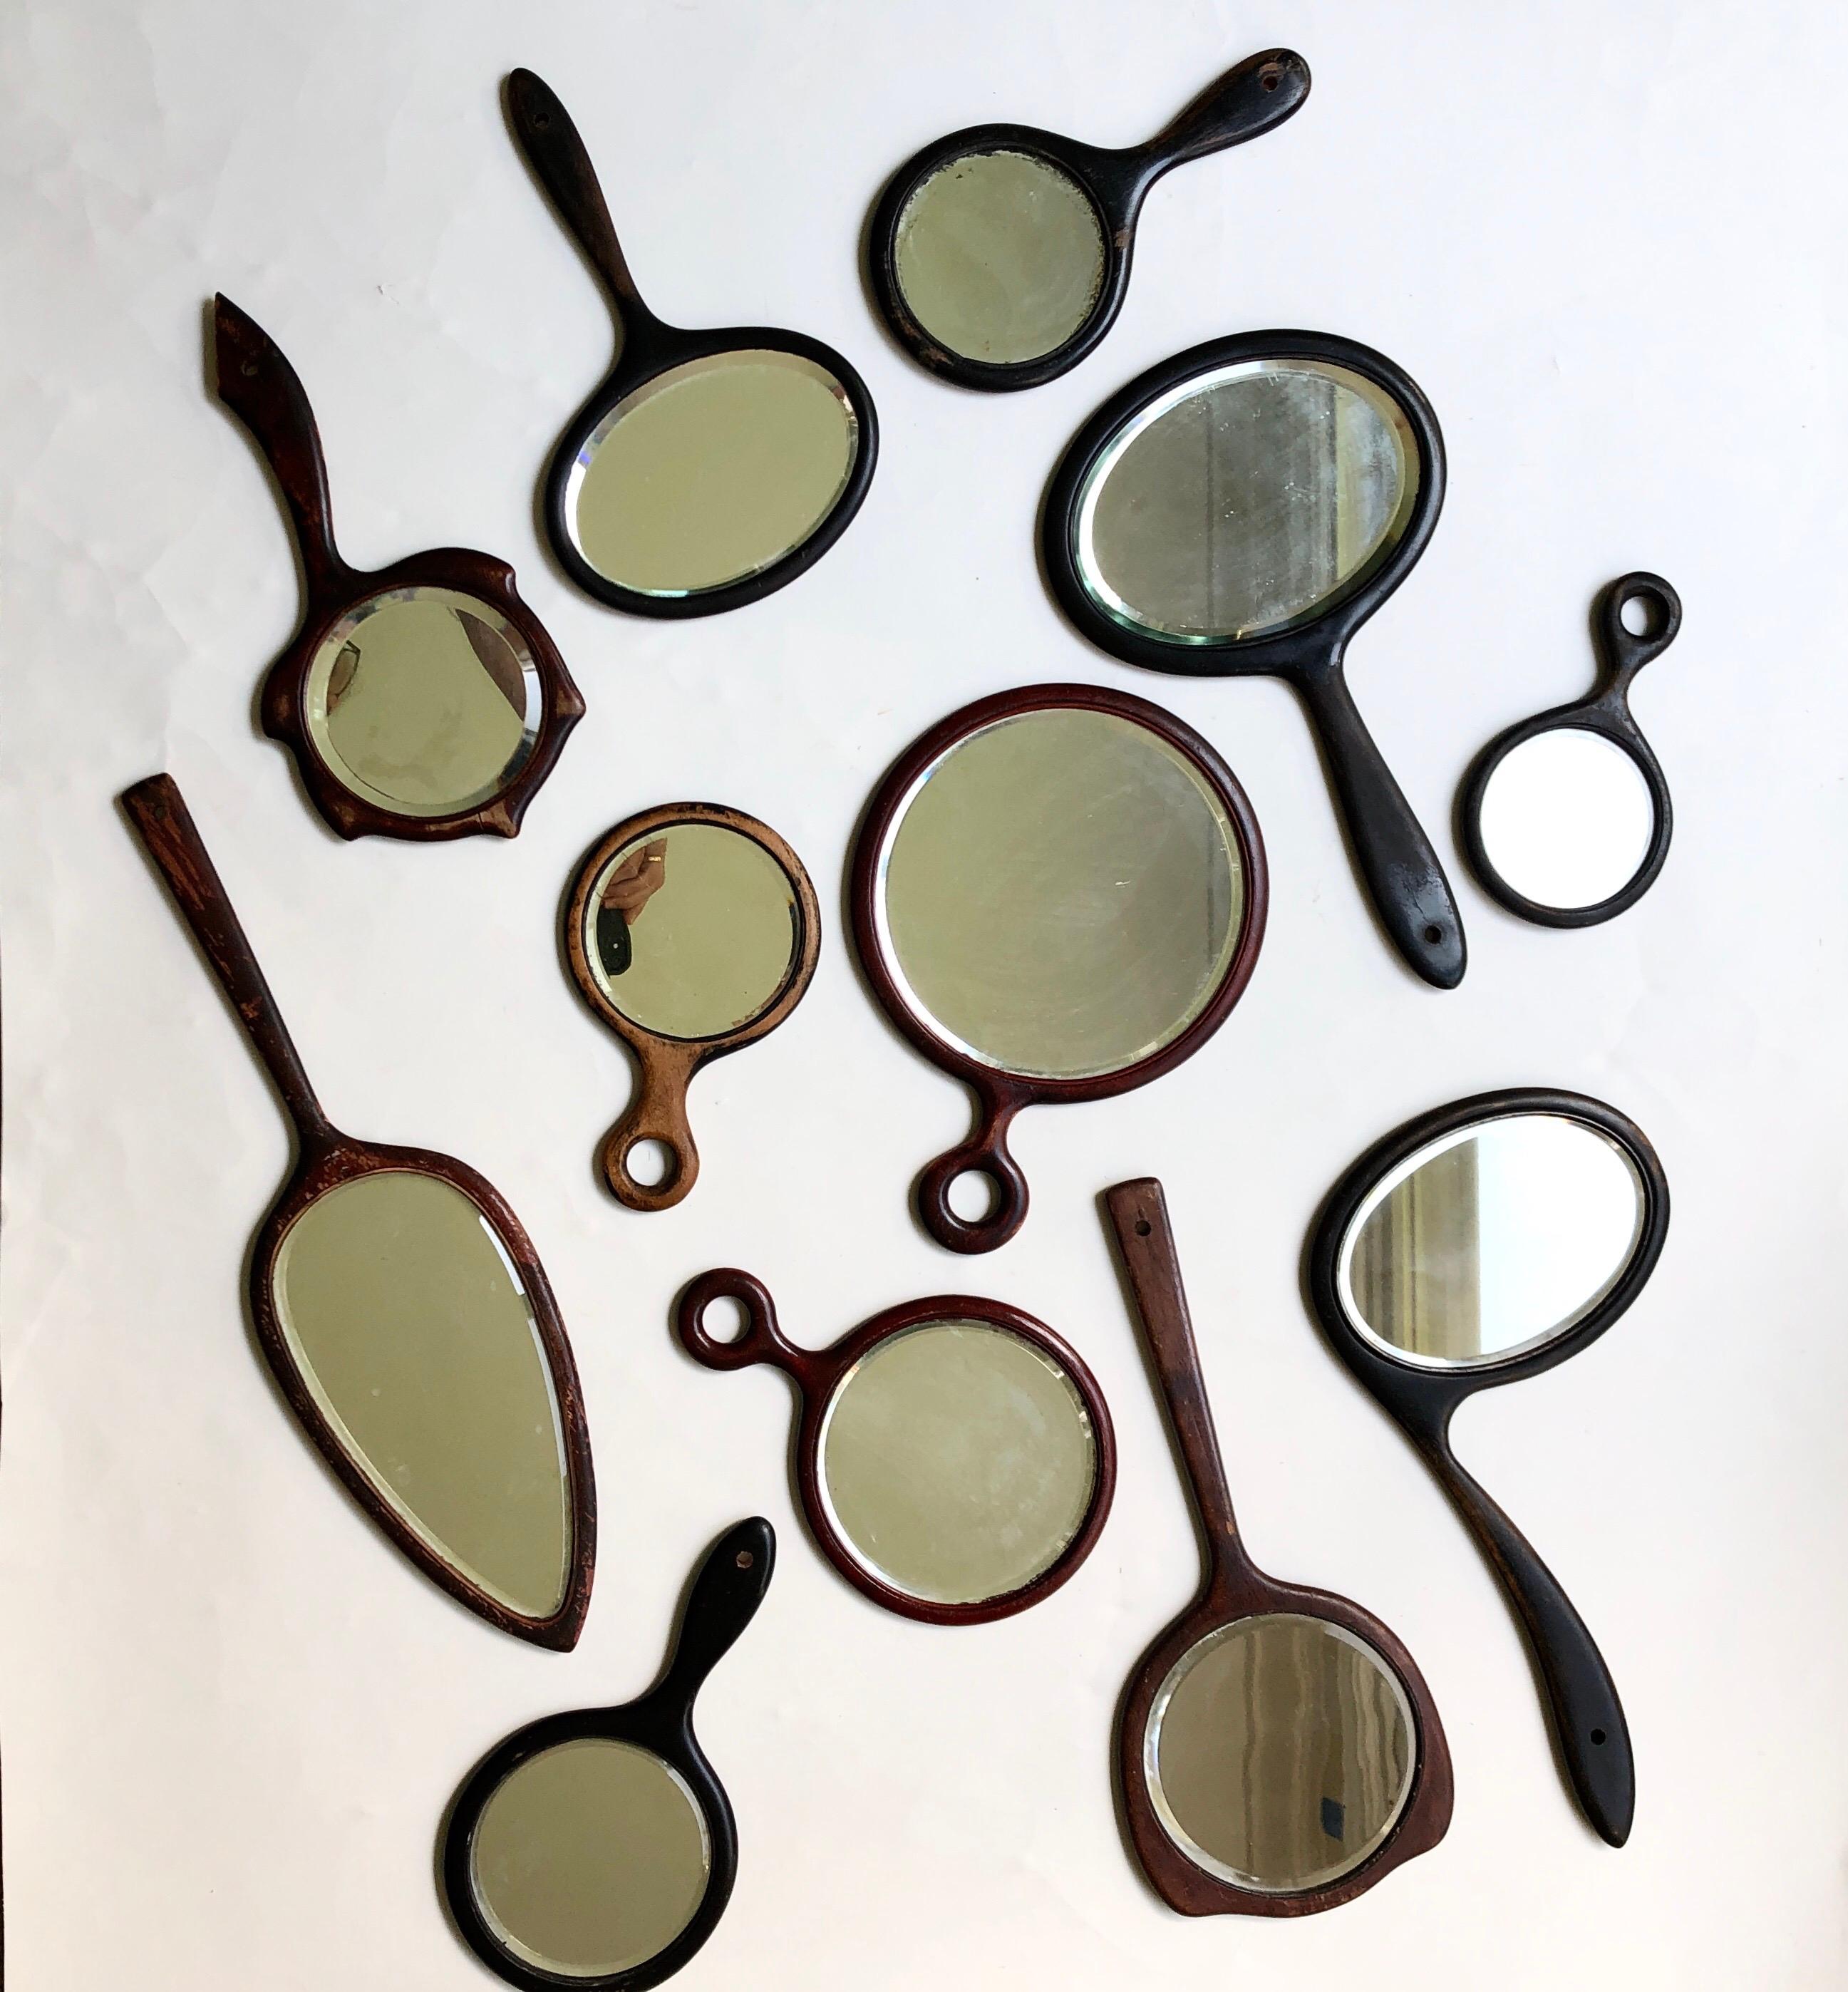 Unknown Antique Beveled Glass Wooden Hand Mirror Collection of 12